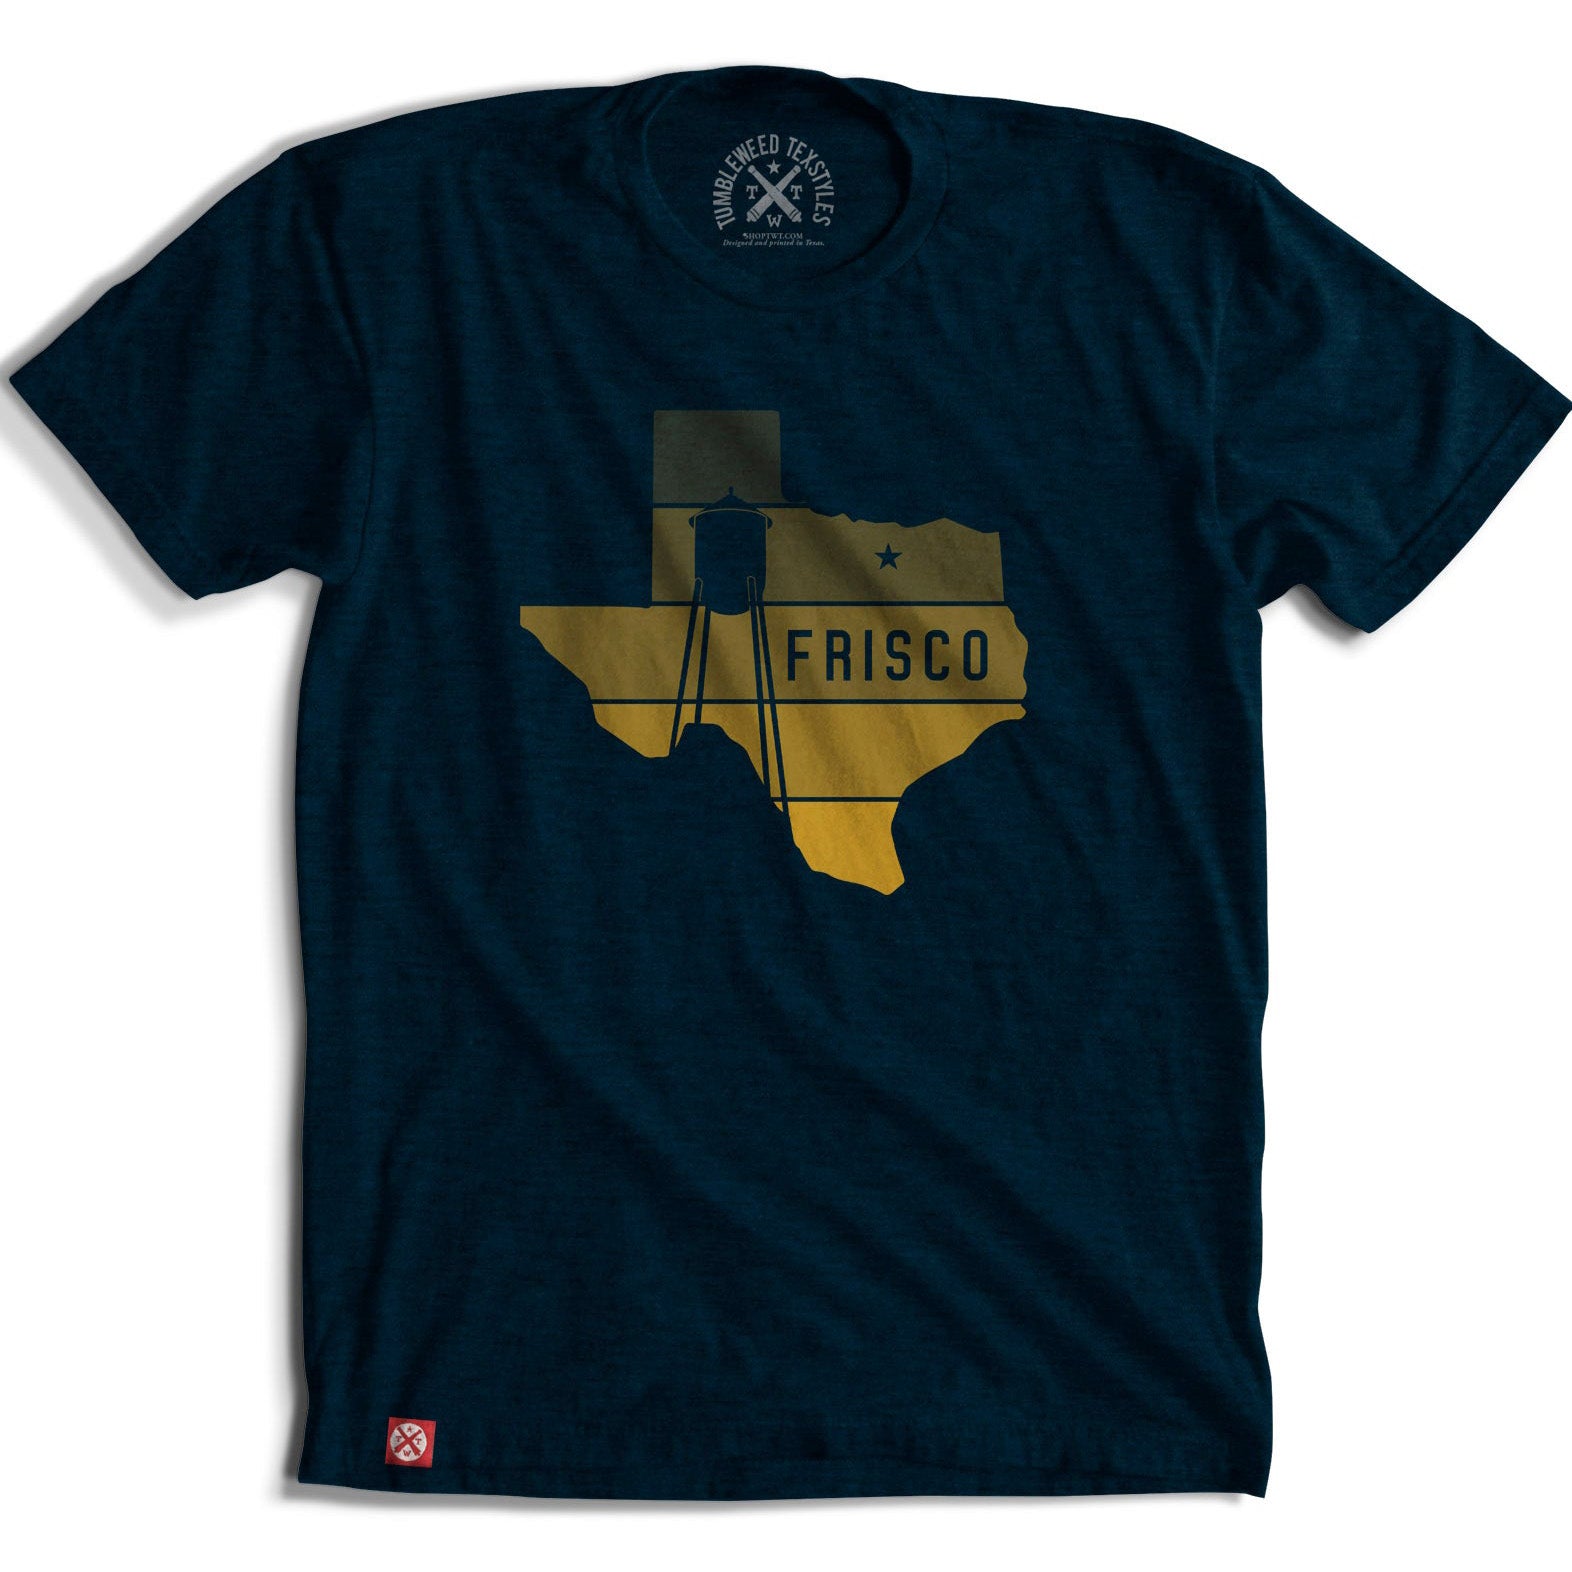 Frisco Water Tower in Texas T-Shirt (Navy)